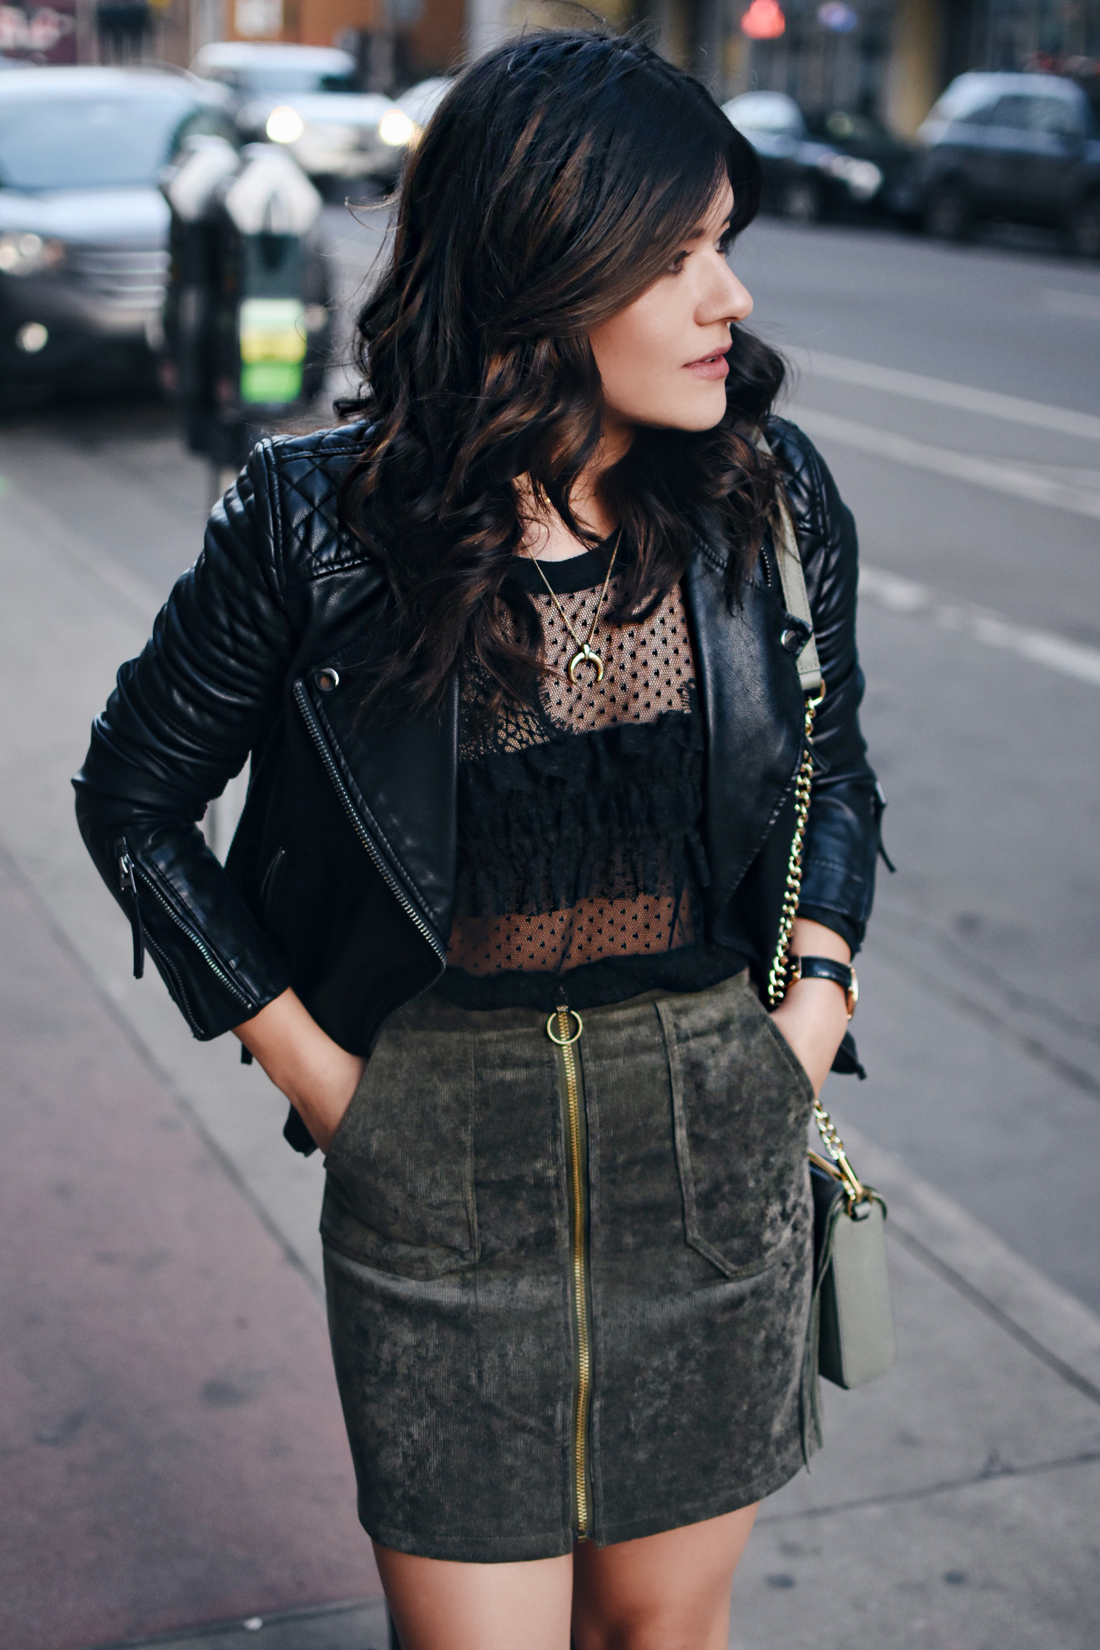 Carolina Hellal of Chictalk wearing a Topshop mesh top and faux leather jacket, Chicwish corduroy skirt, Rebecca Minkoff bag, and strap sandals